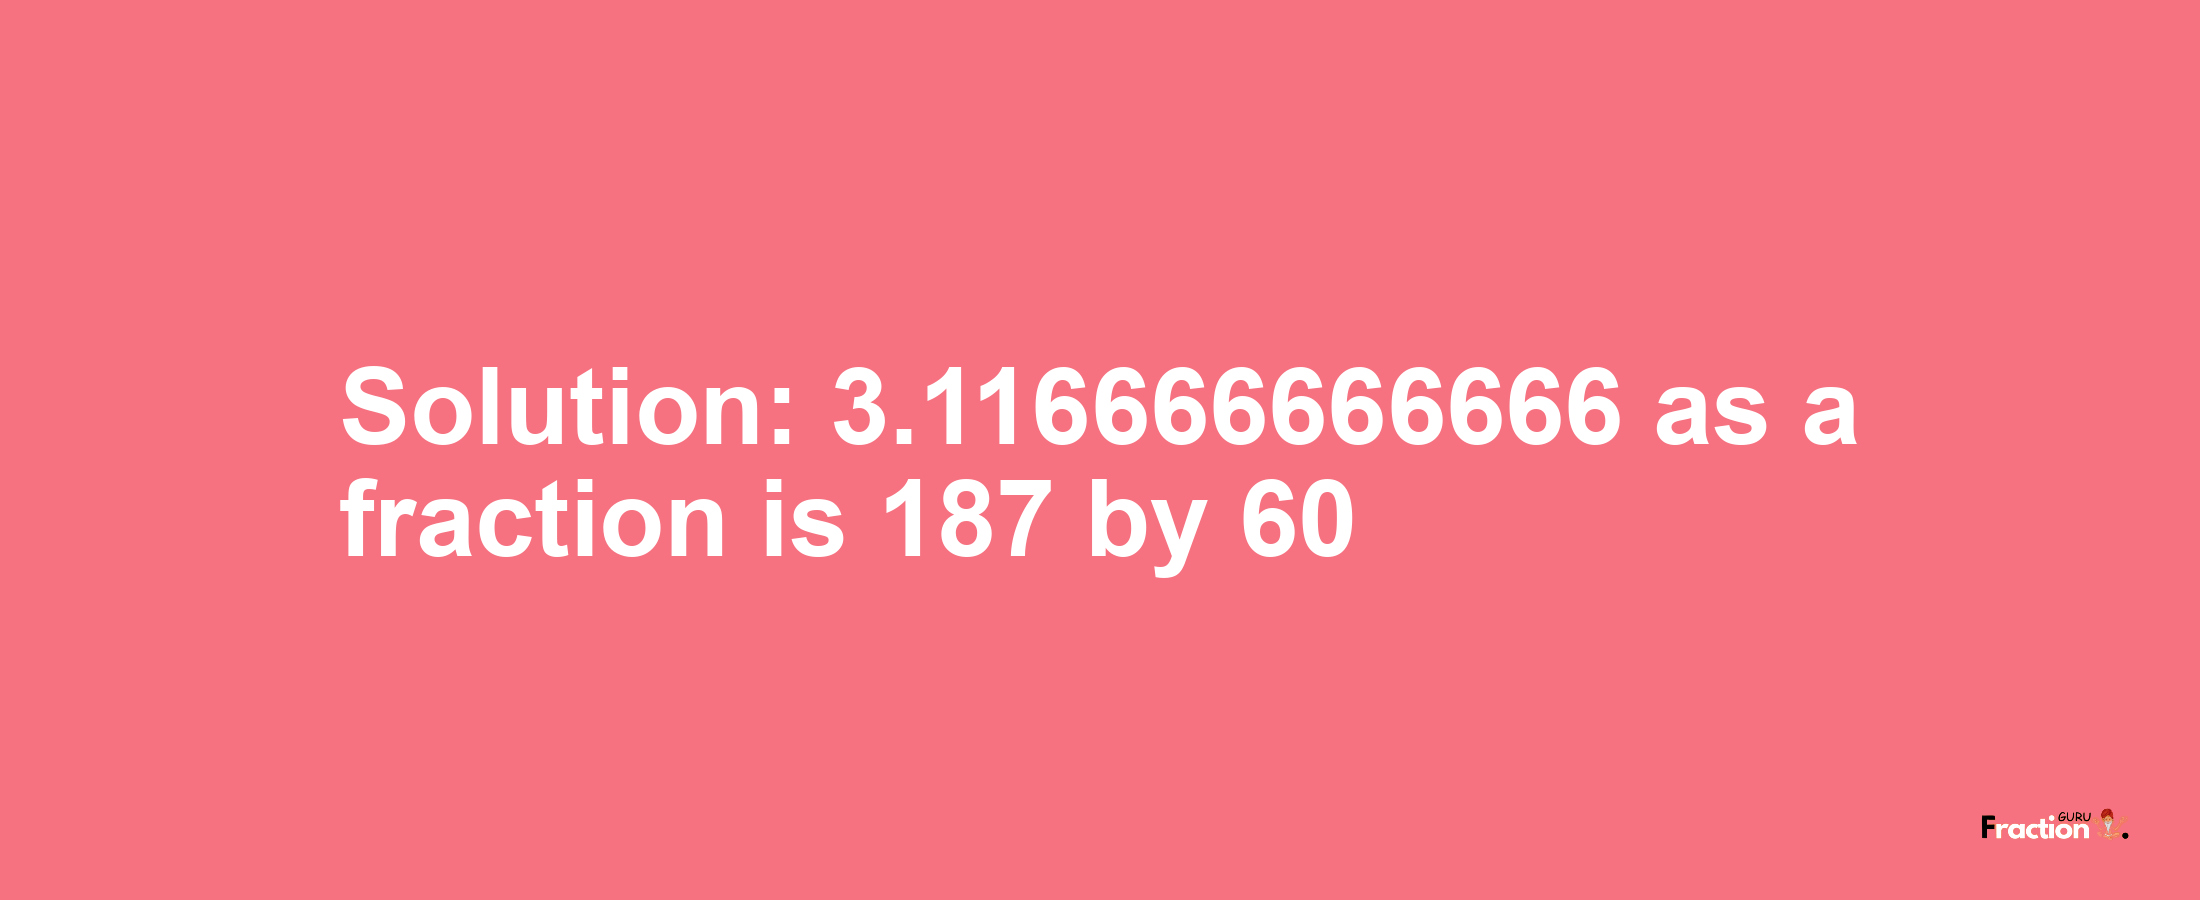 Solution:3.116666666666 as a fraction is 187/60